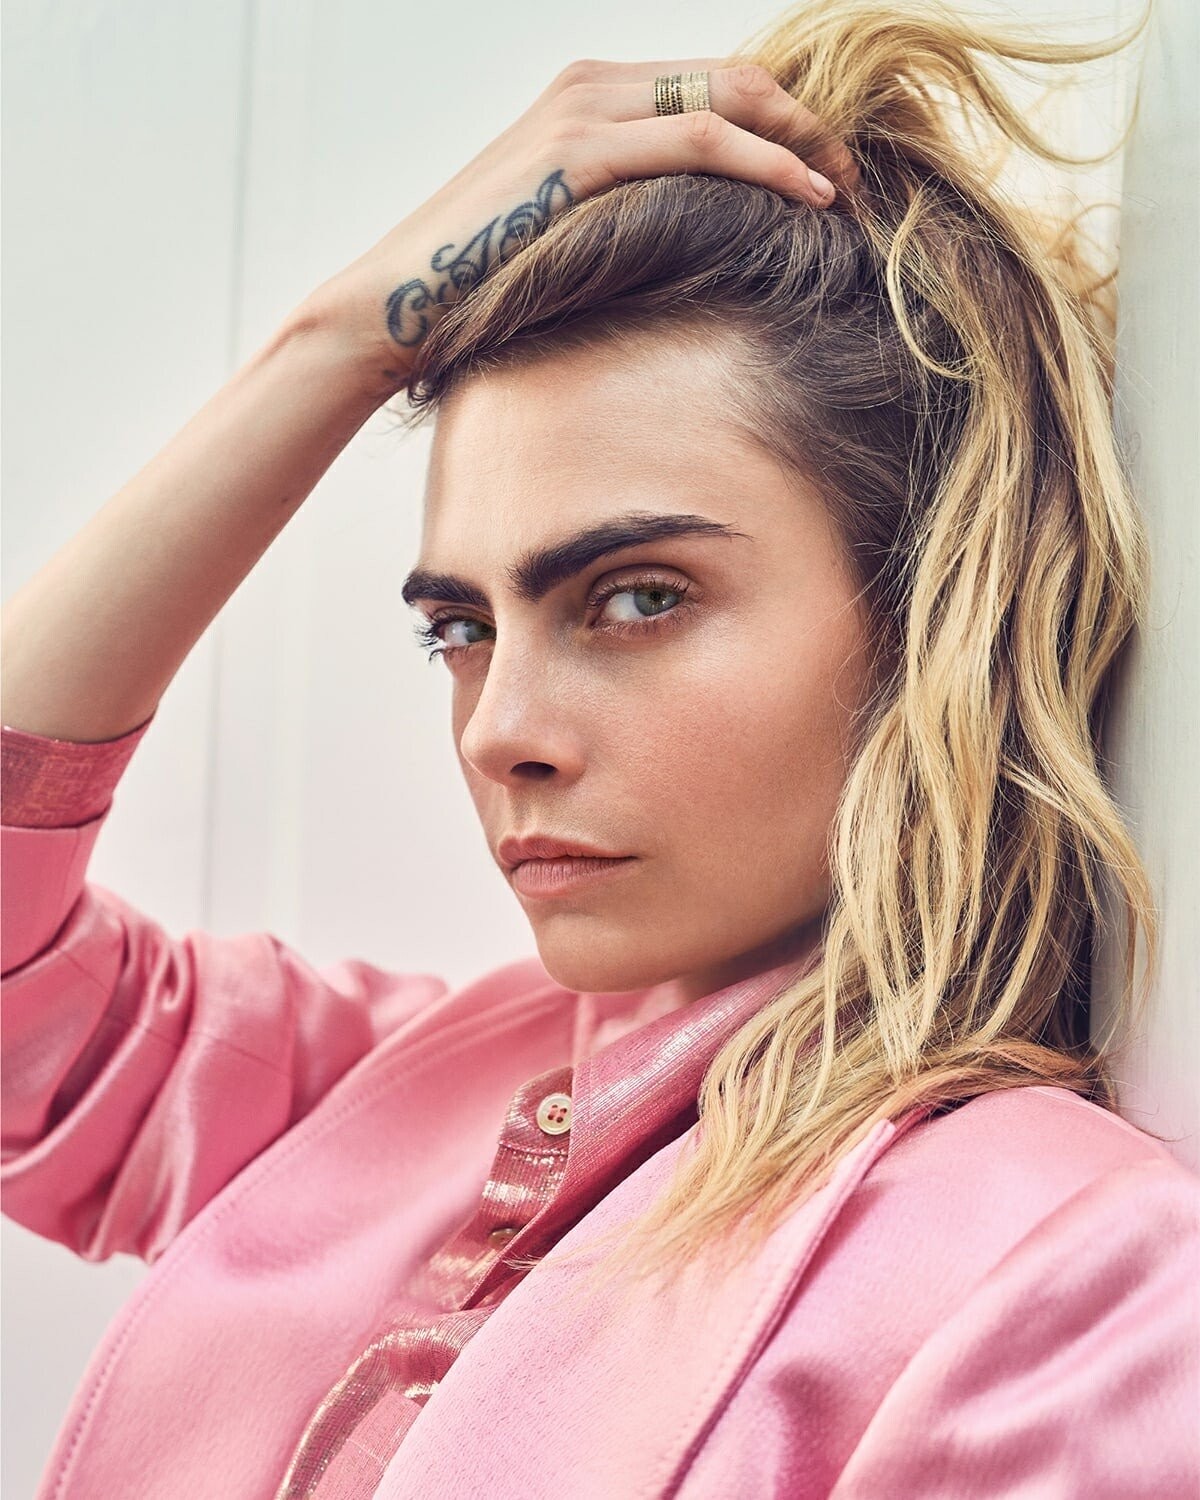 Cara Deleving Sexy By Beau Grealy TheFappening Pro 4 - Cara Delevingne Sexy In Variety Magazine (7 Photos)